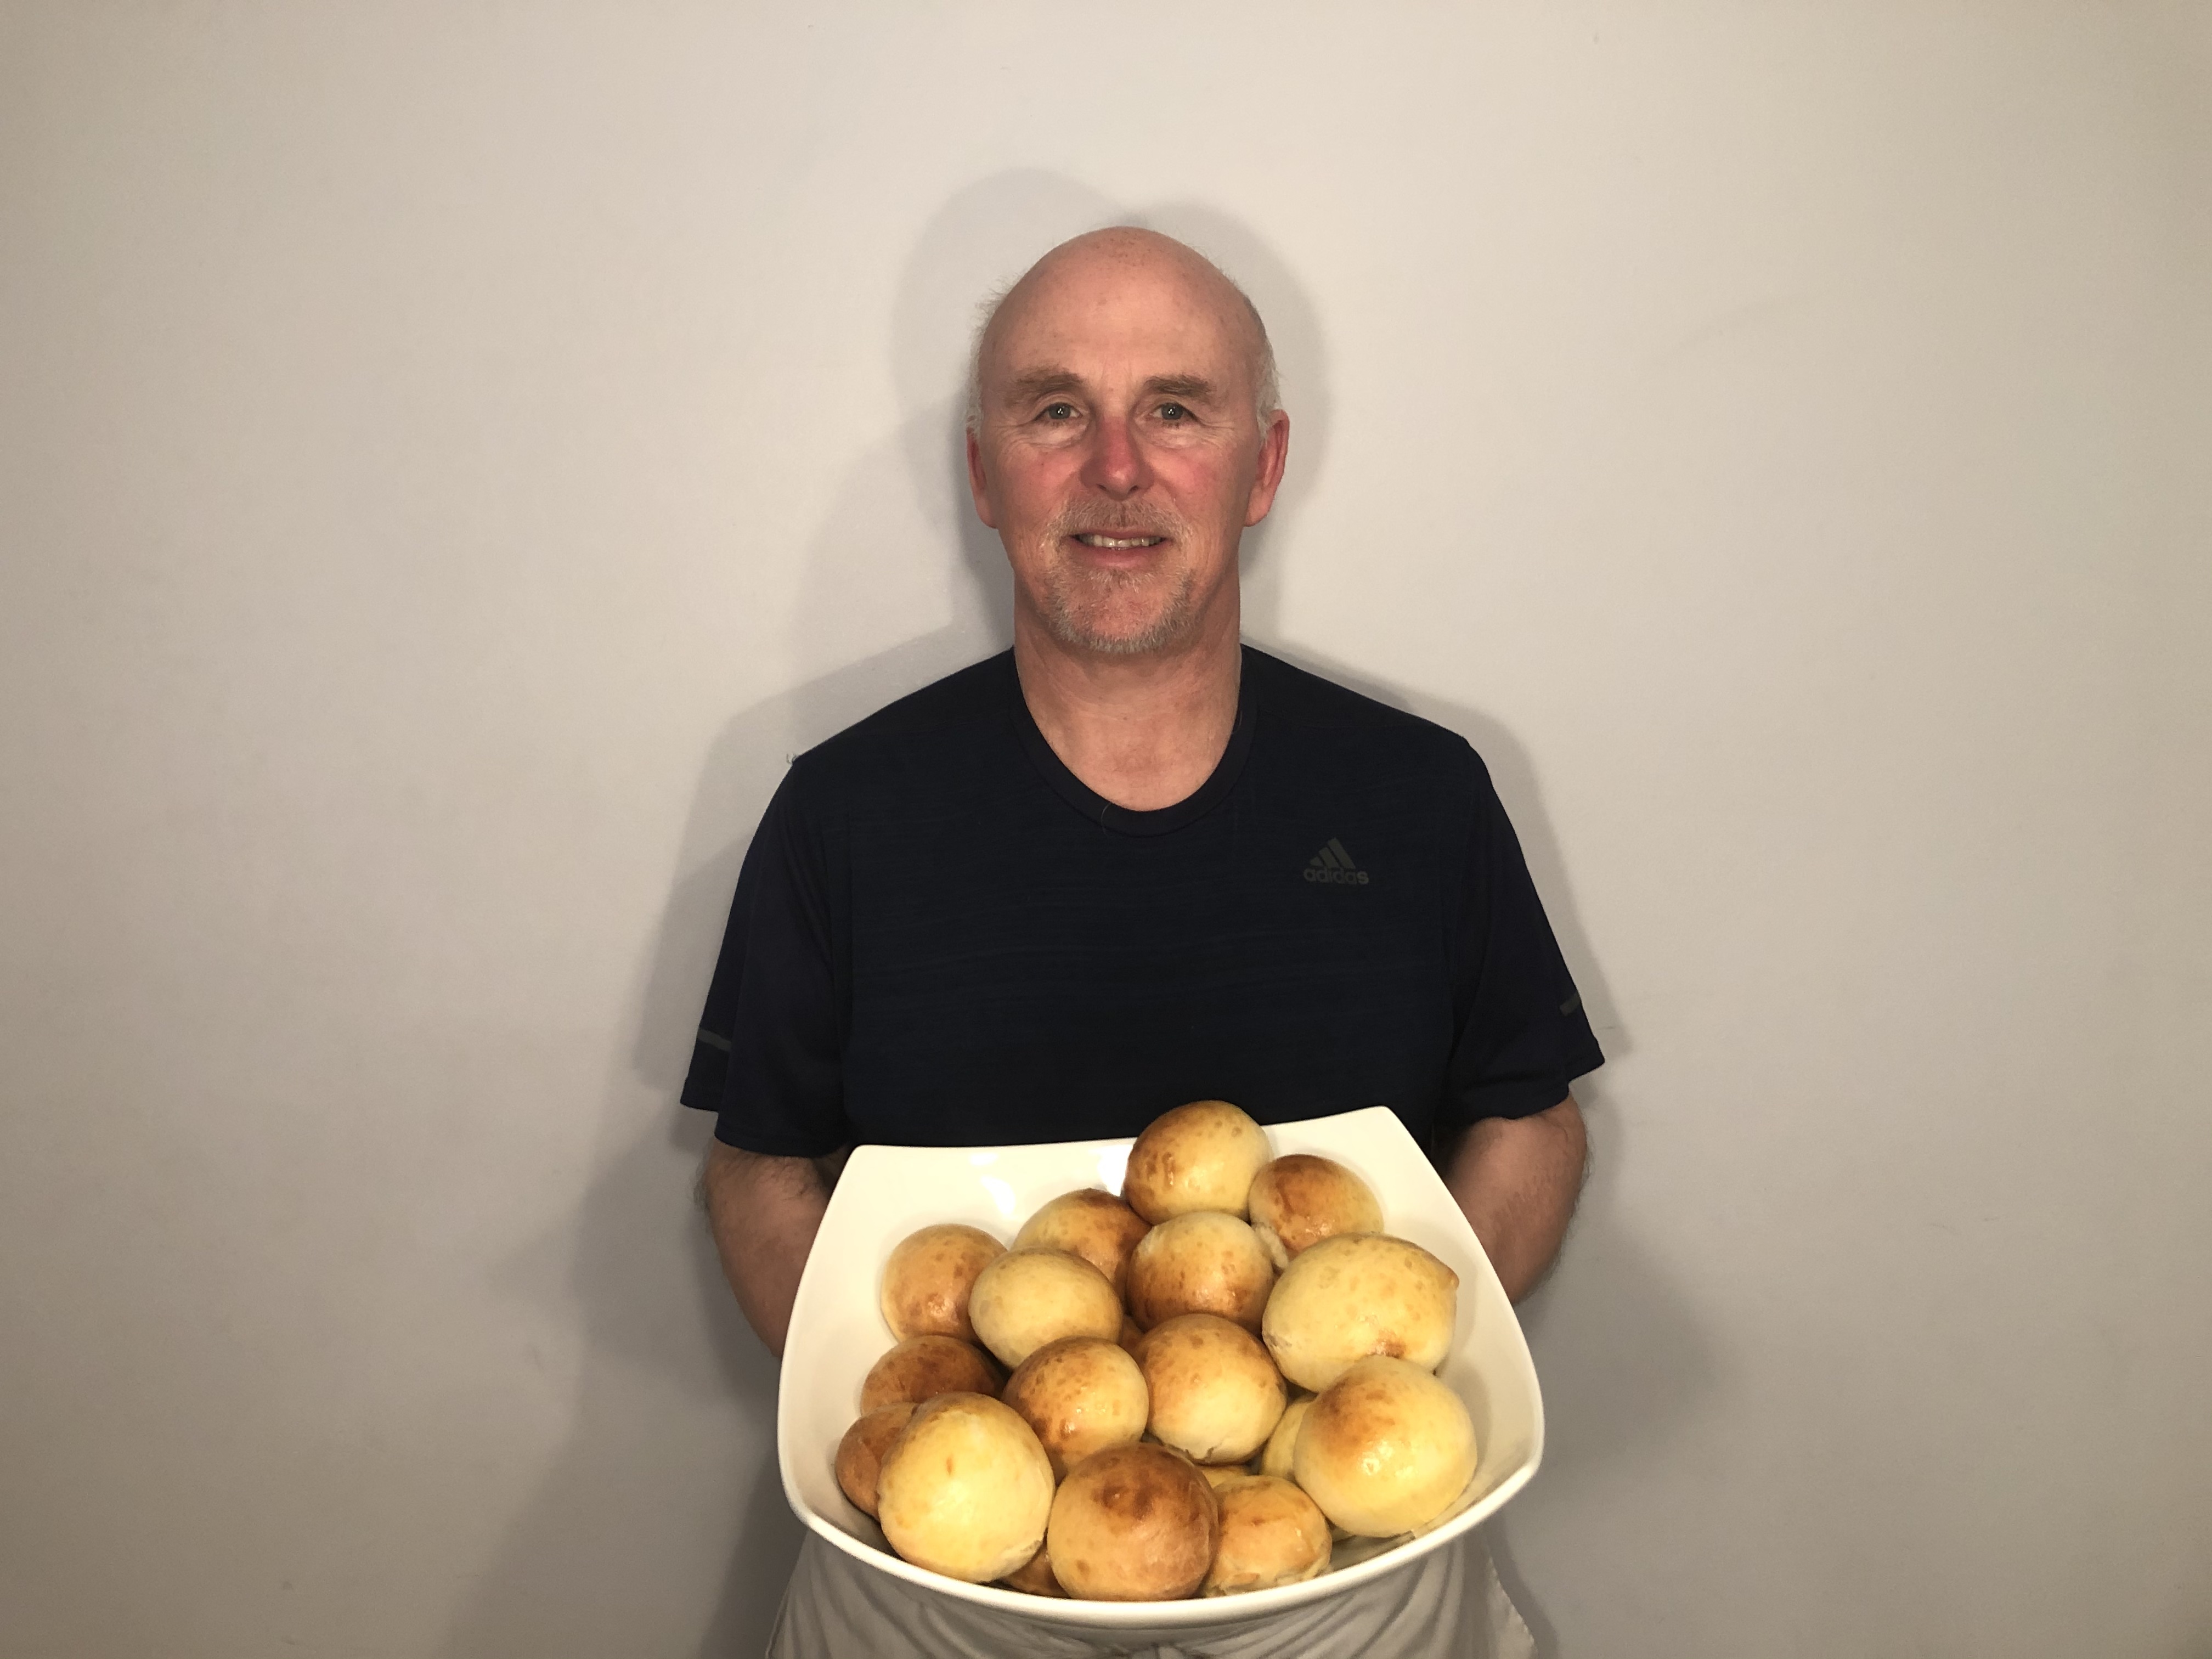 Chef Rob holding a plate of dinner rolls